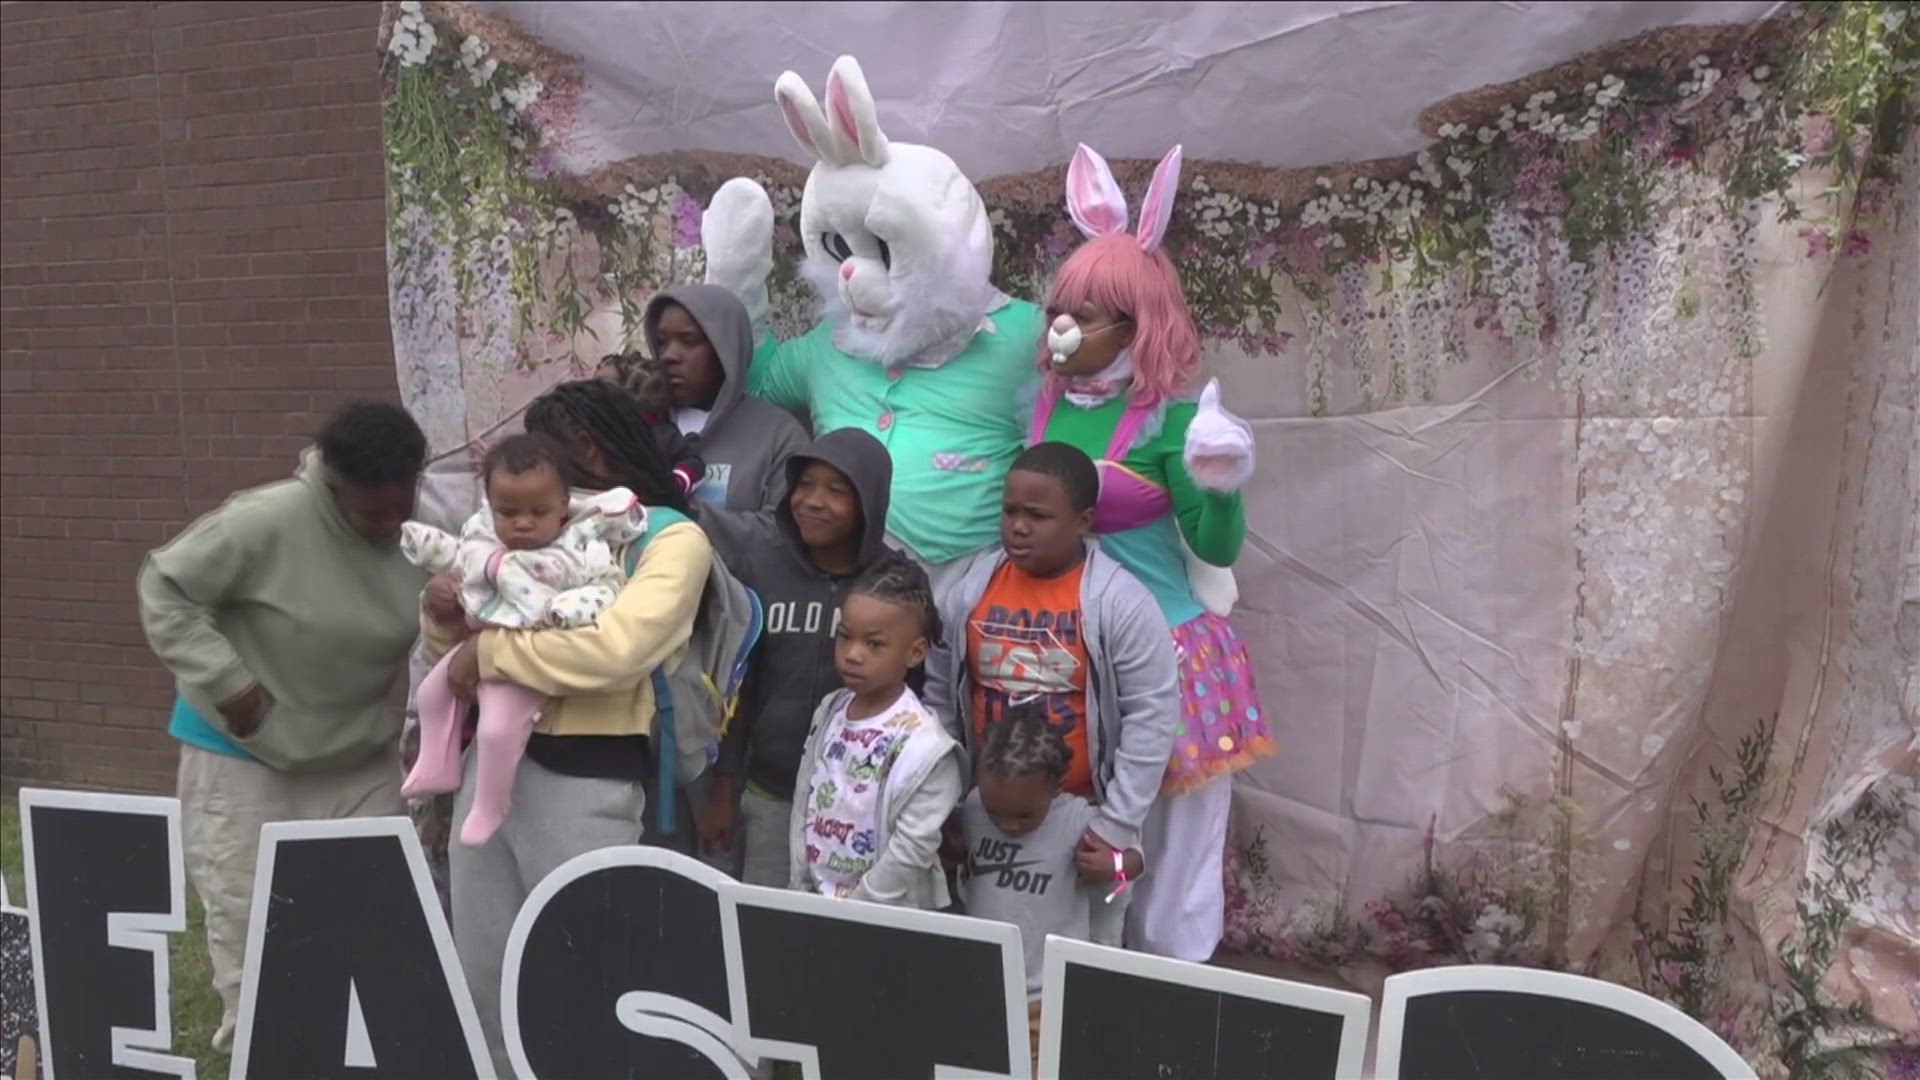 The event featured 10,000 Easter eggs for kids to hunt, 500 Easter baskets, food, music and vaccinations.